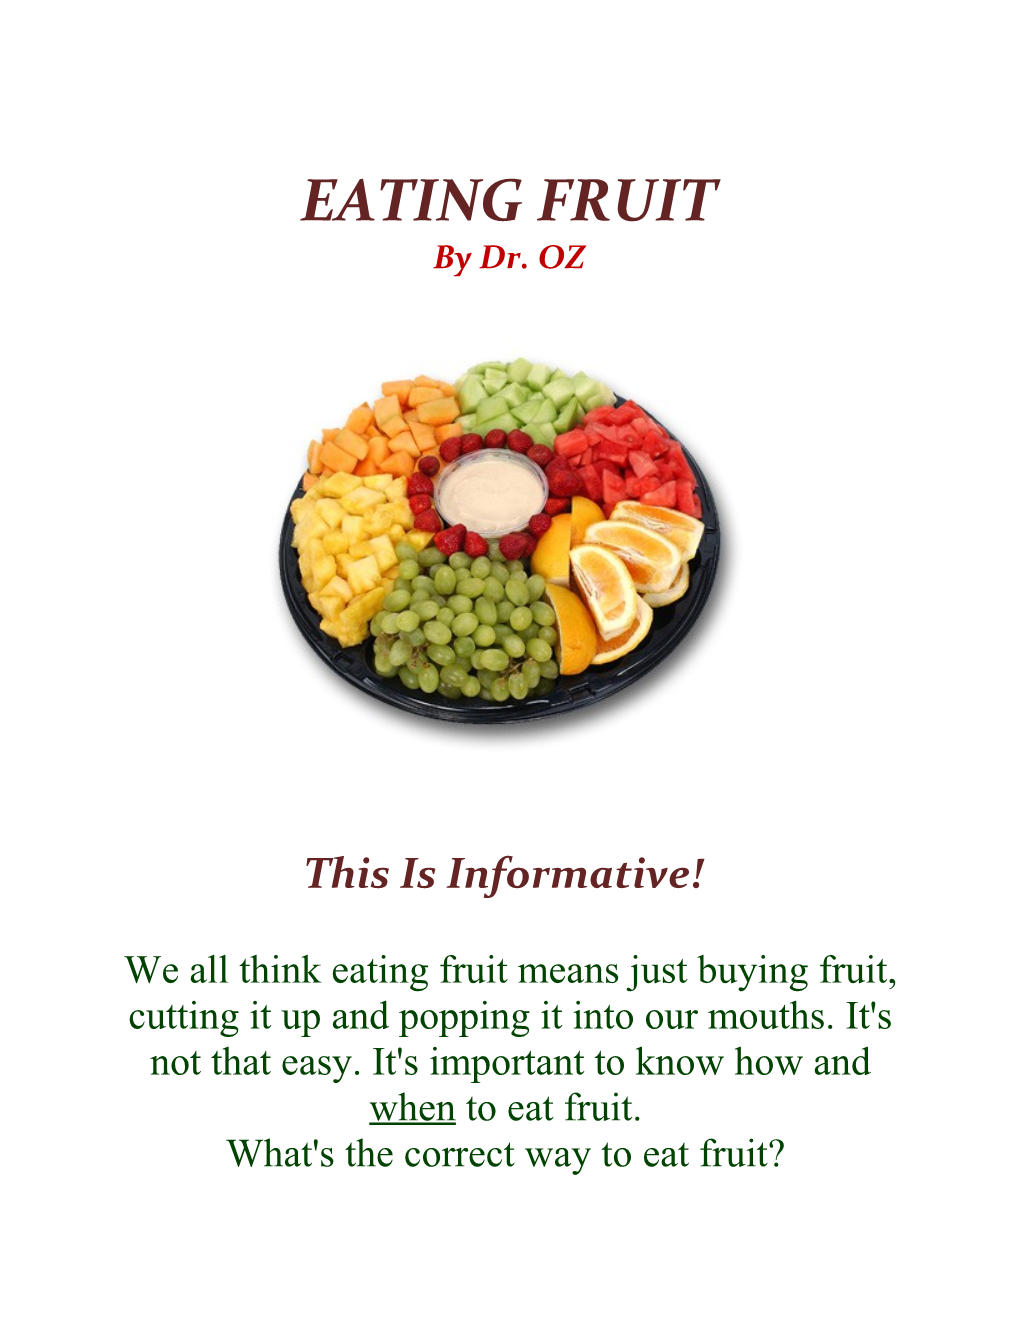 It Means Not Eating Fruit After a Meal! Fruit Should Be Eaten on an Empty Stomach